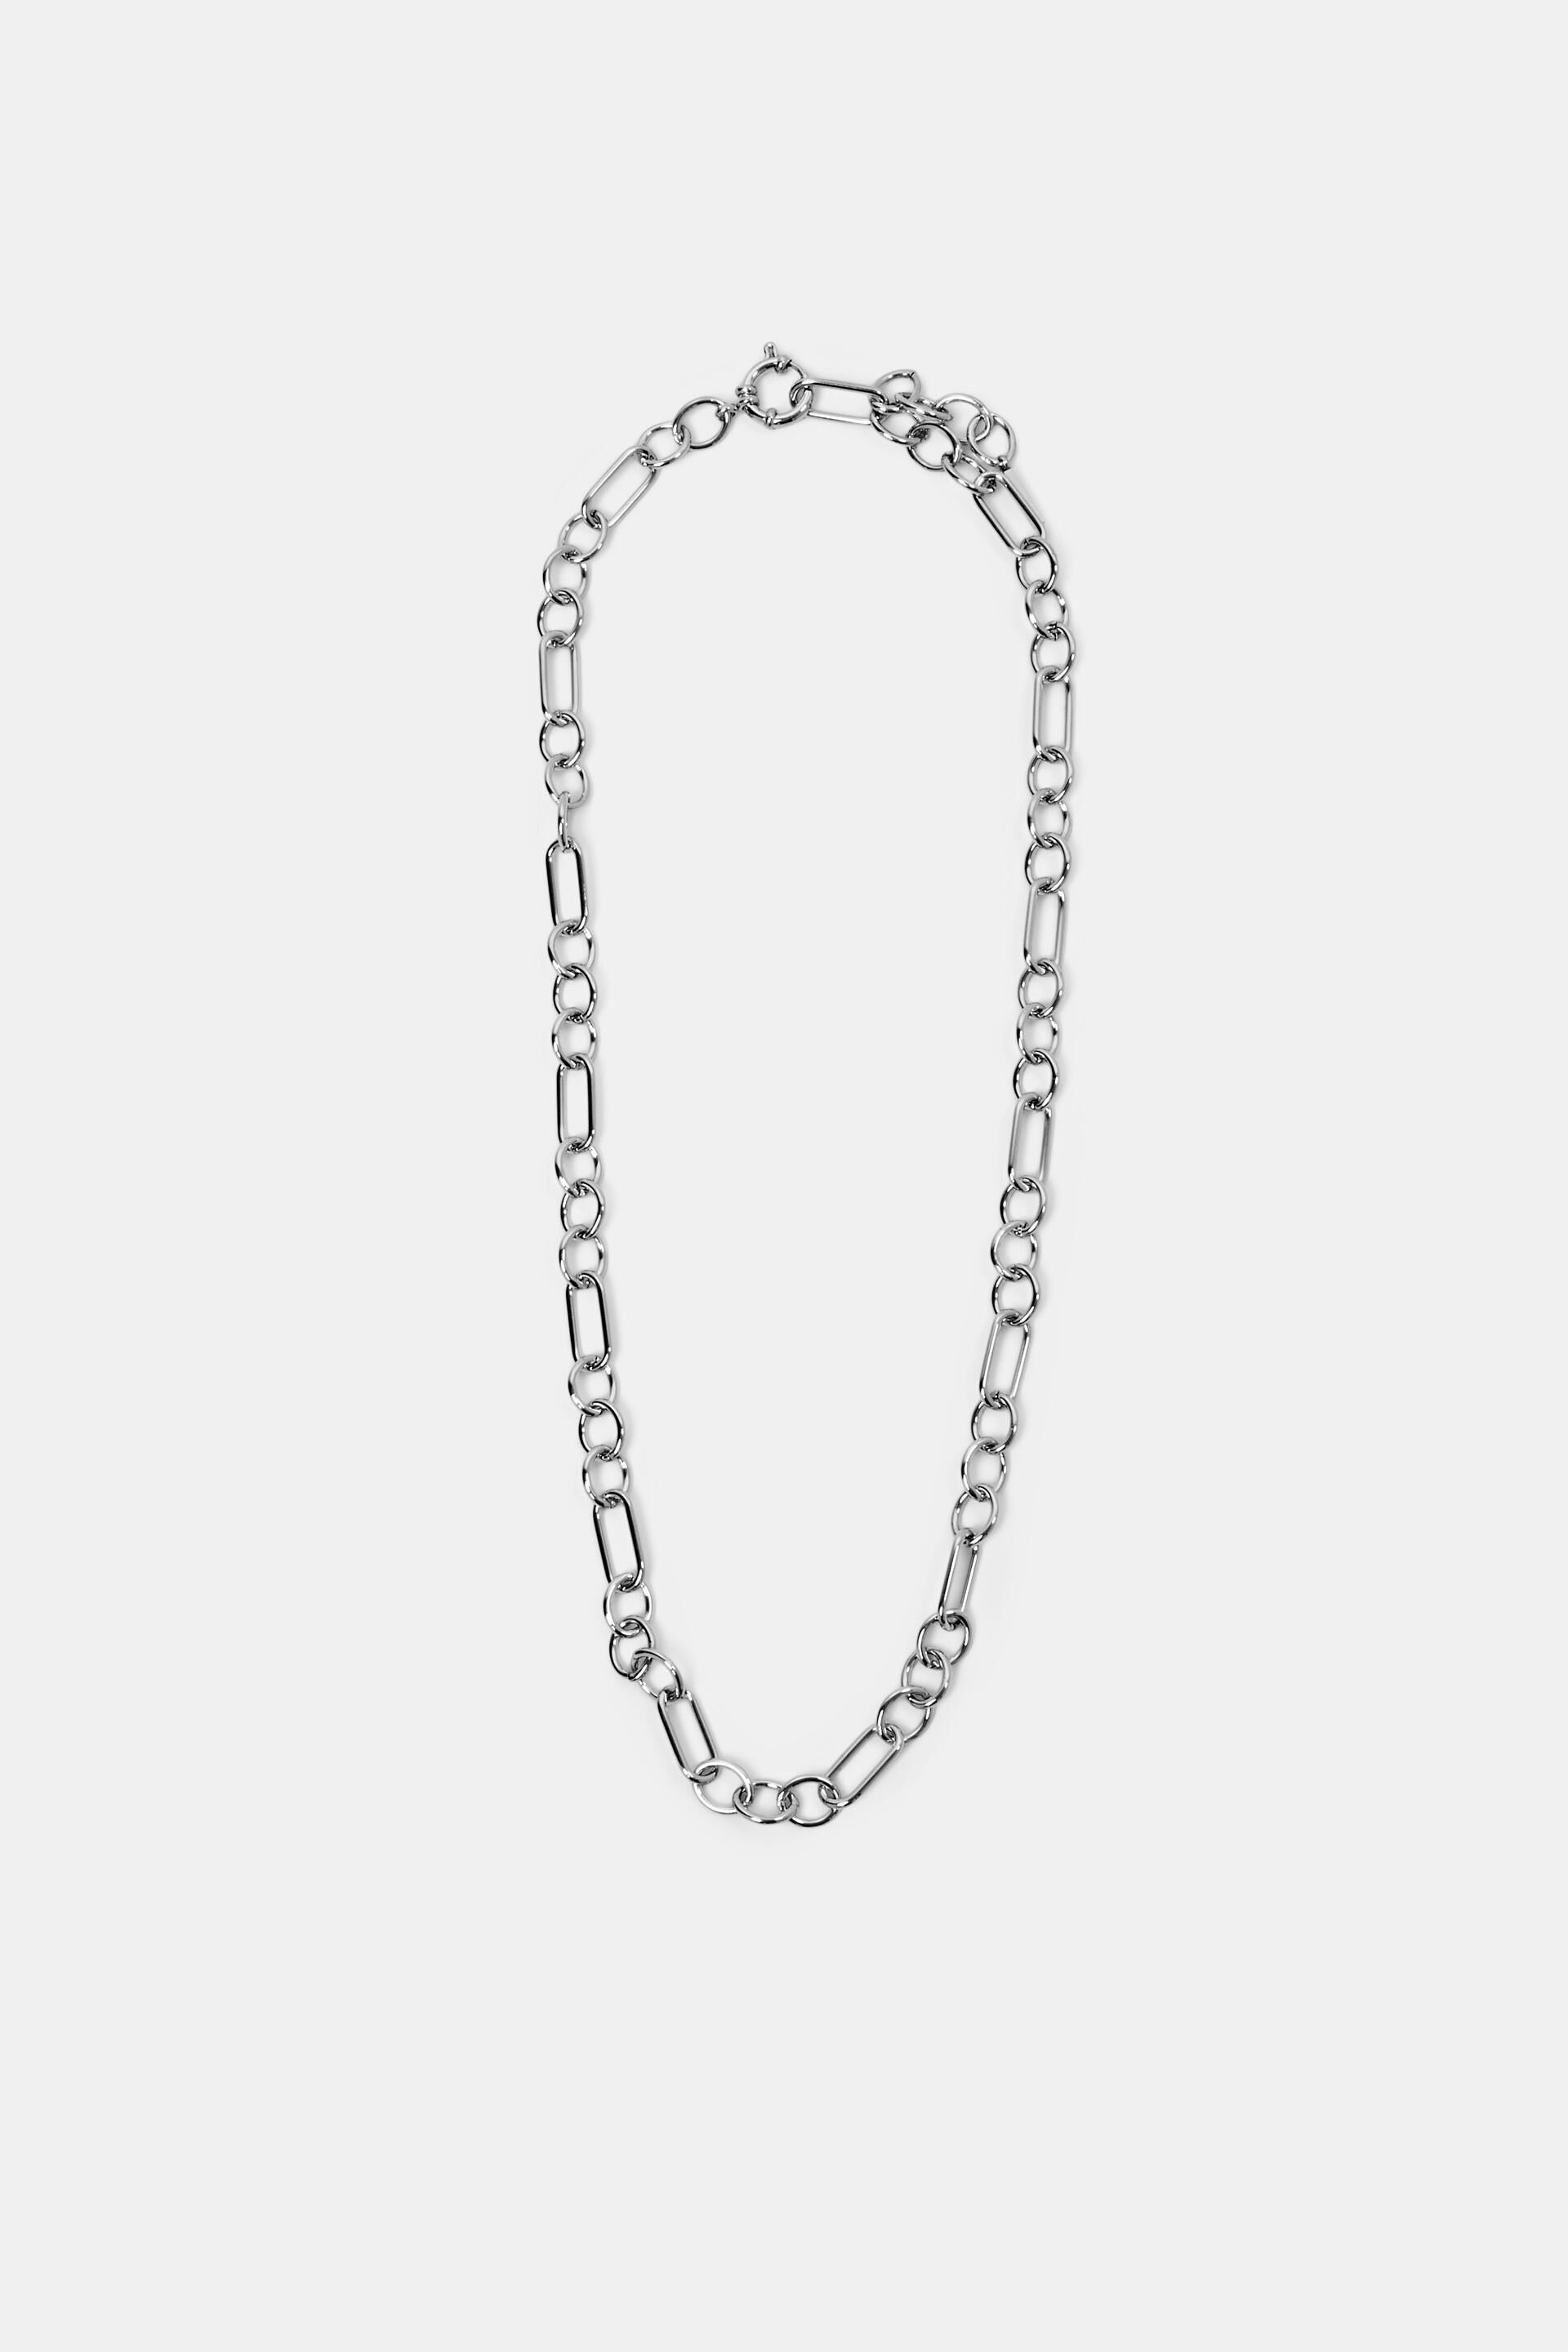 Esprit steel stainless necklace, Chain